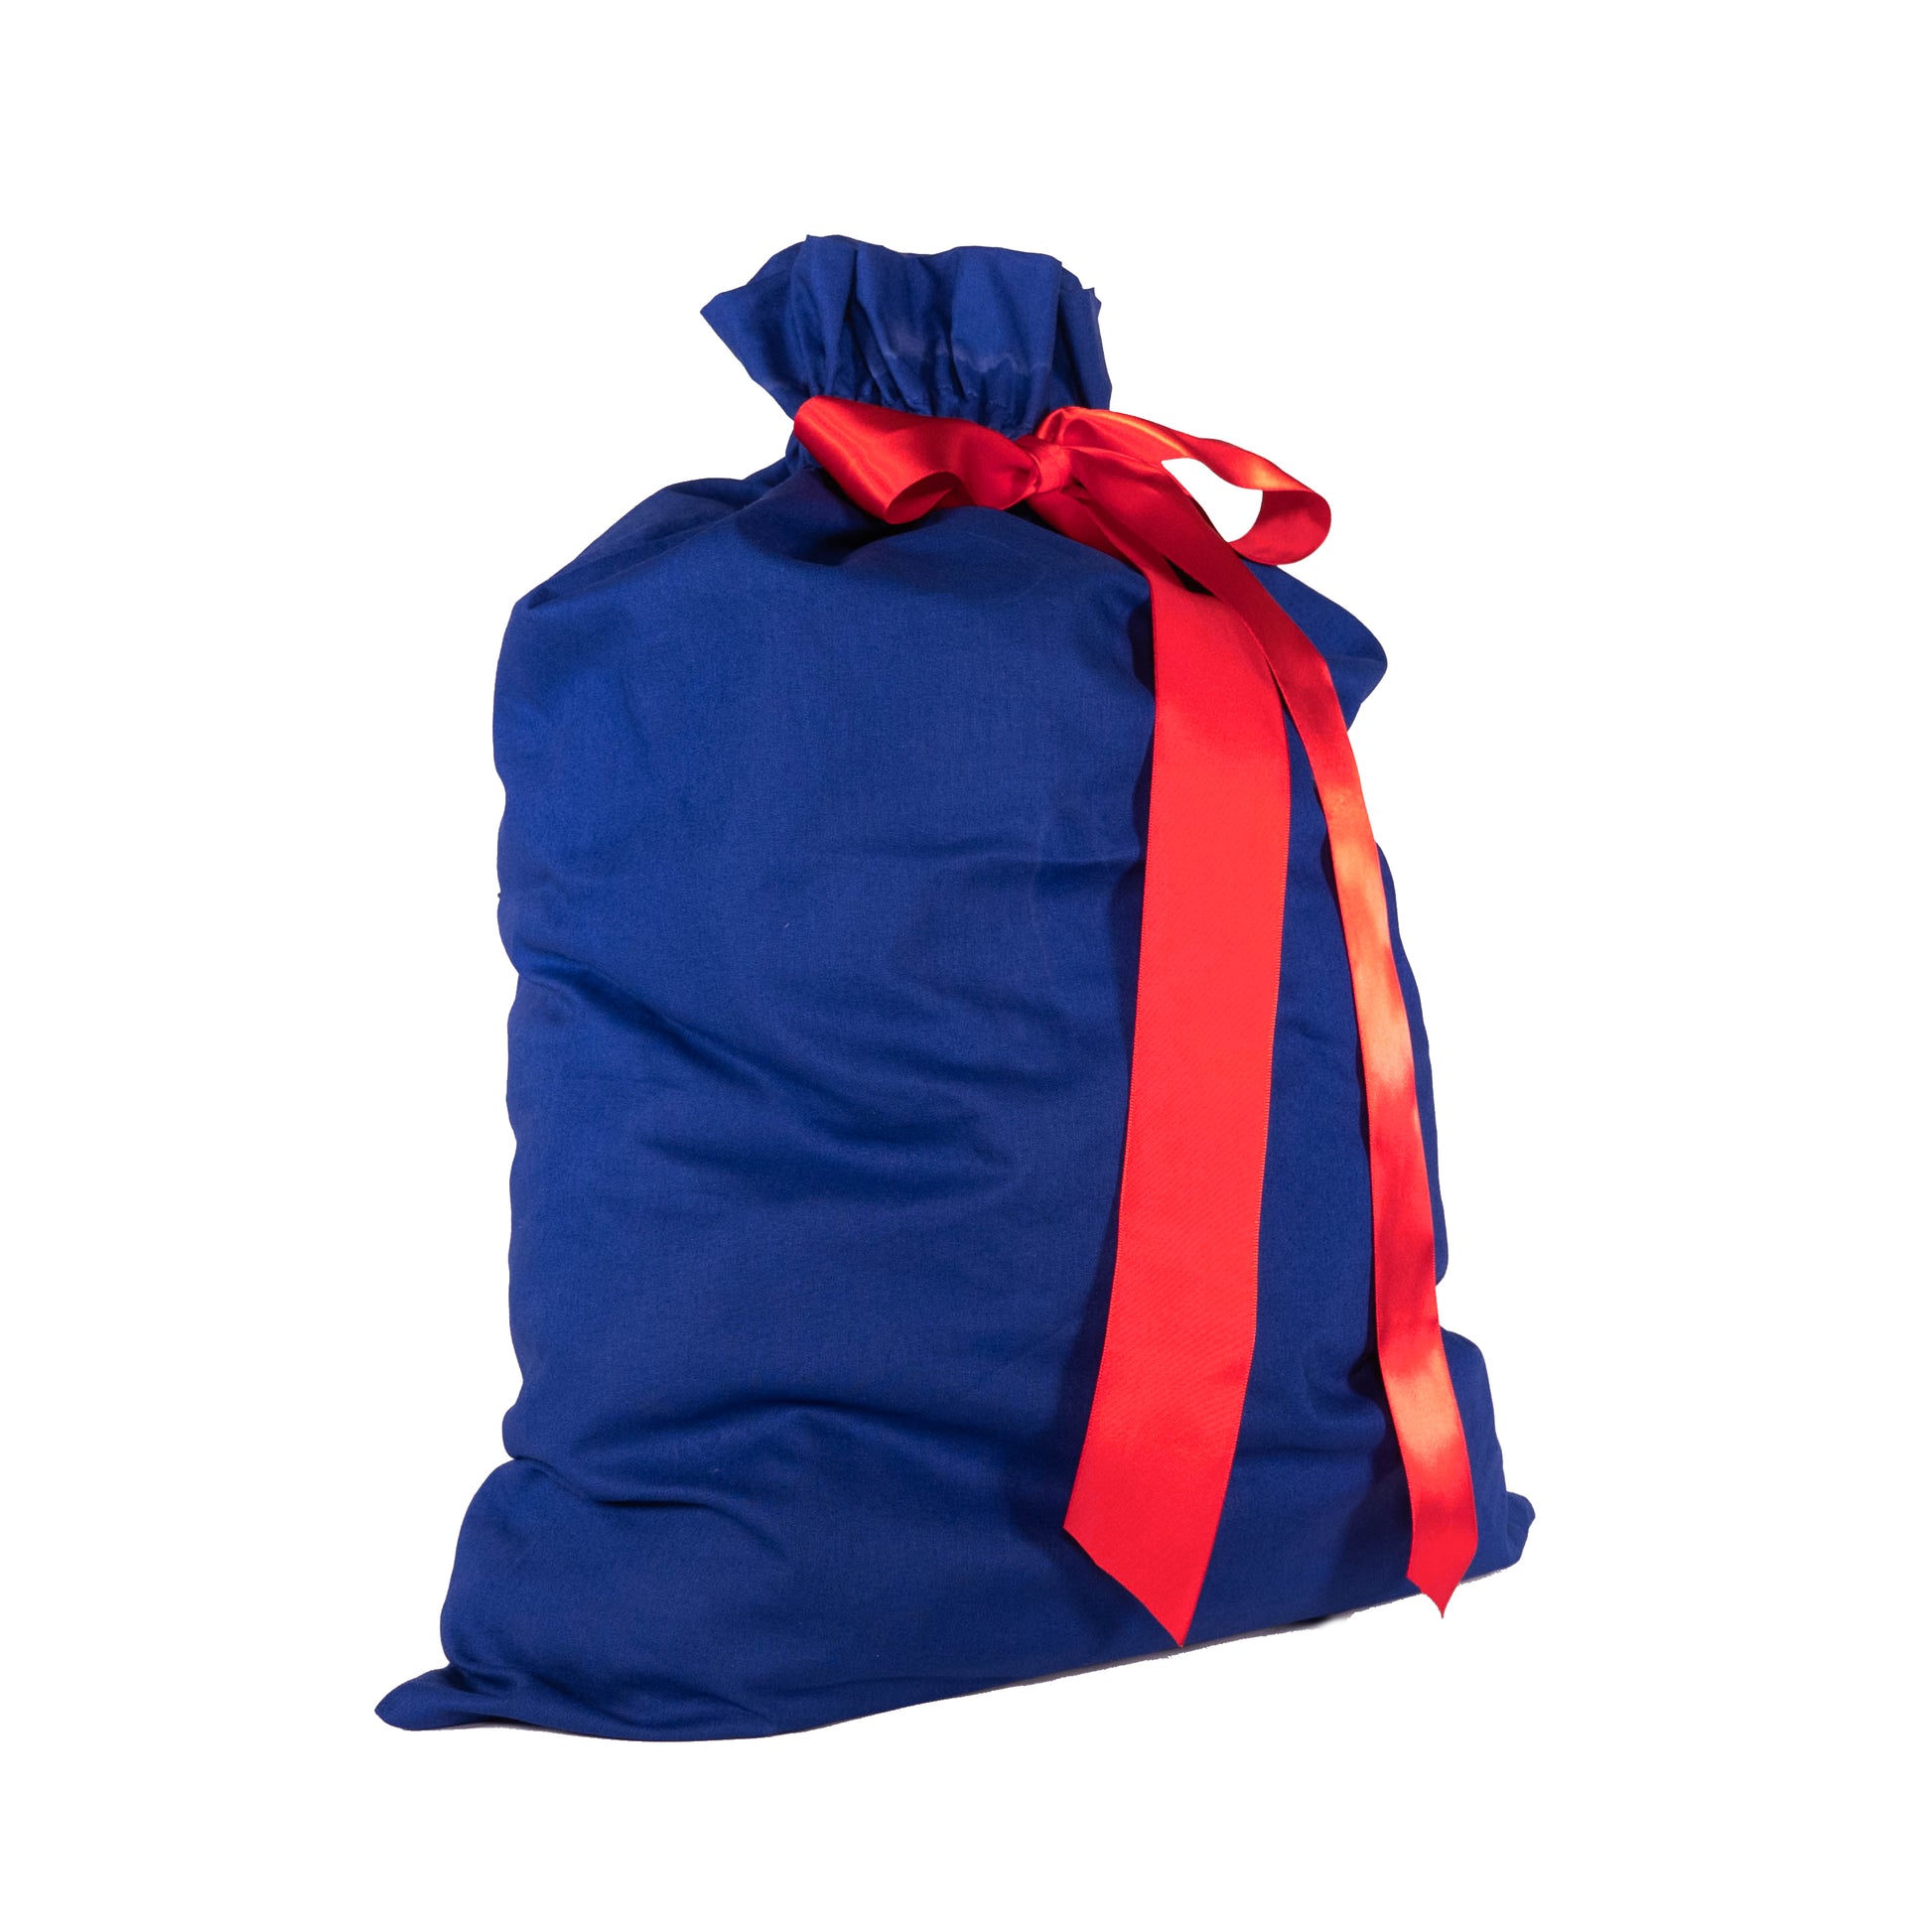 Red, Blue, Green, & White solid colored and Wintery design Eco-Friendly Gift Bags and Gift Sacks Bundle and Save - EverWrap